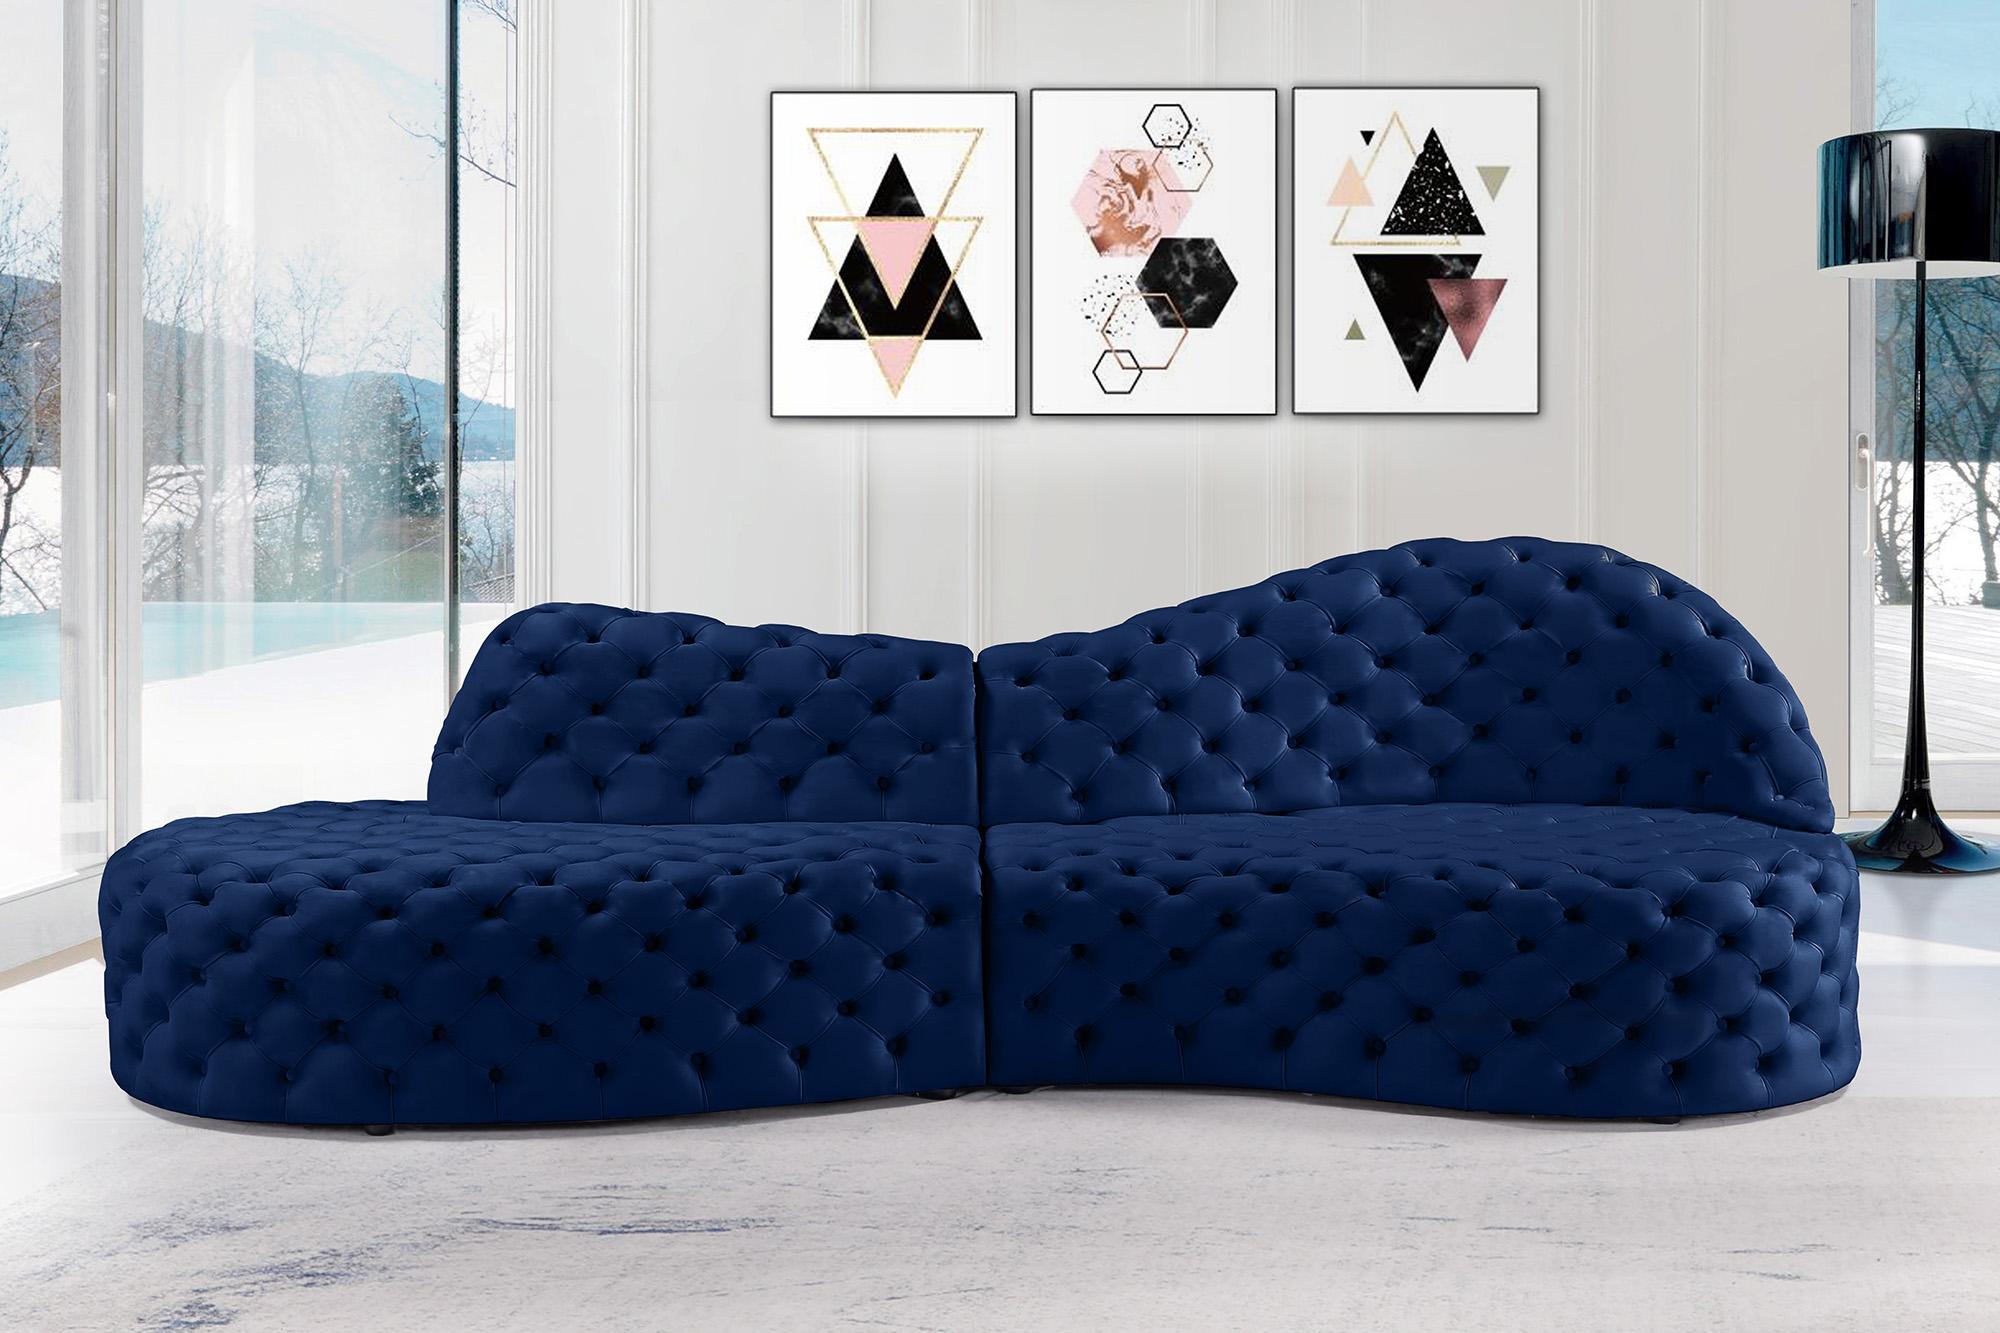 

    
654Navy-Sectional Glam Navy Velvet Tufted Sectional Sofa ROYAL 654Navy Meridian Contemporary
